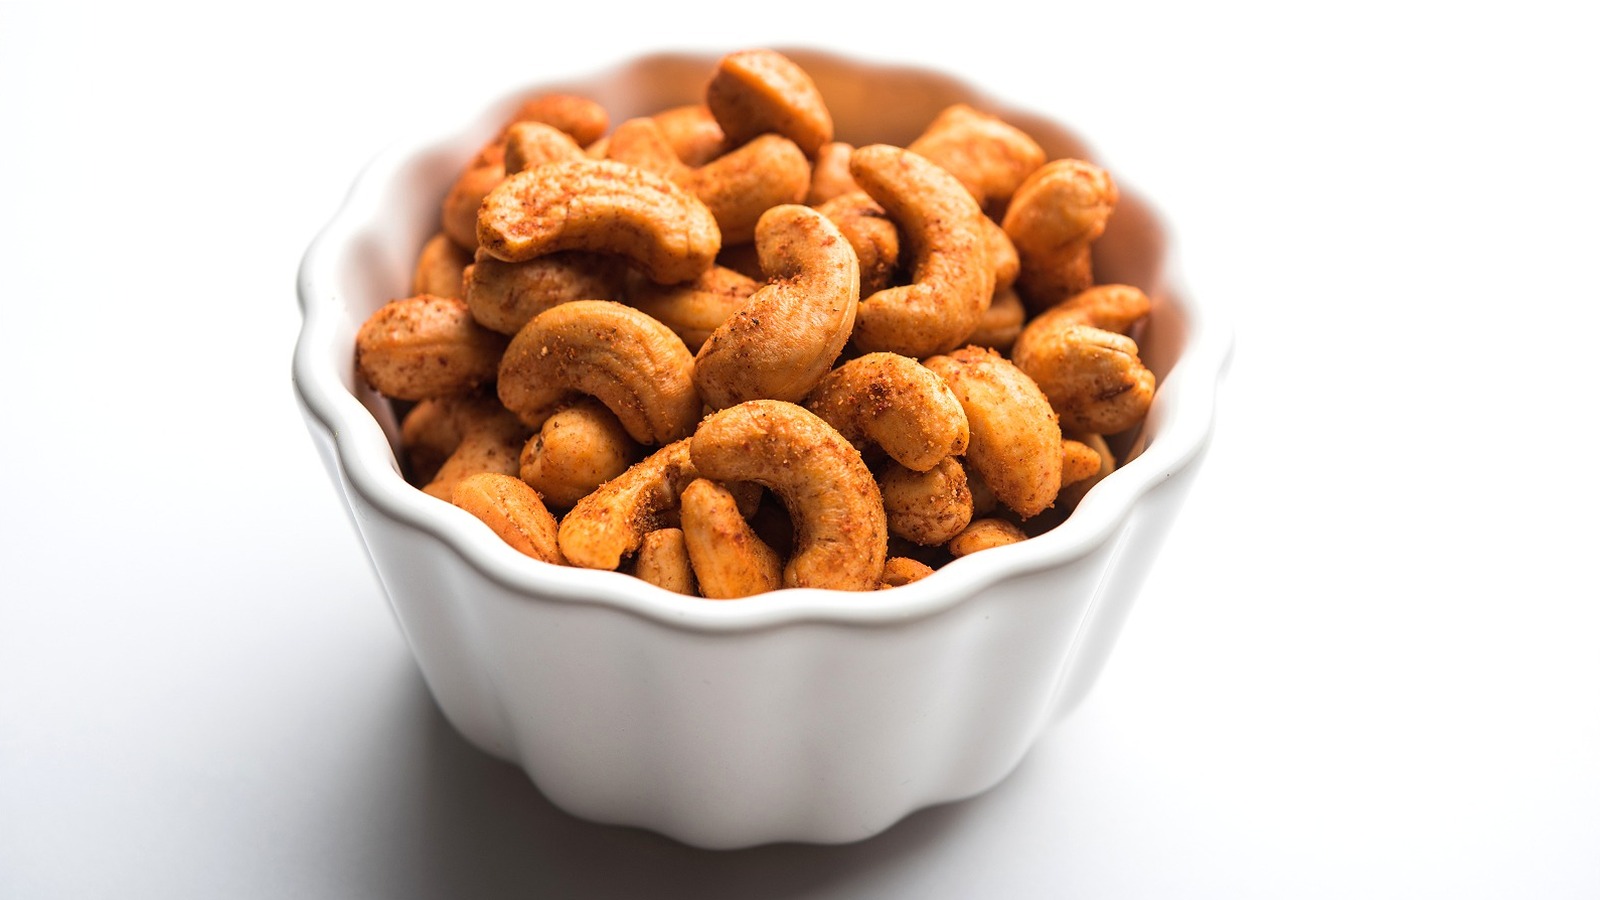 Aldi's Beloved Chili Lime Cashews Are The Ultimate Flavor-Packed Snack